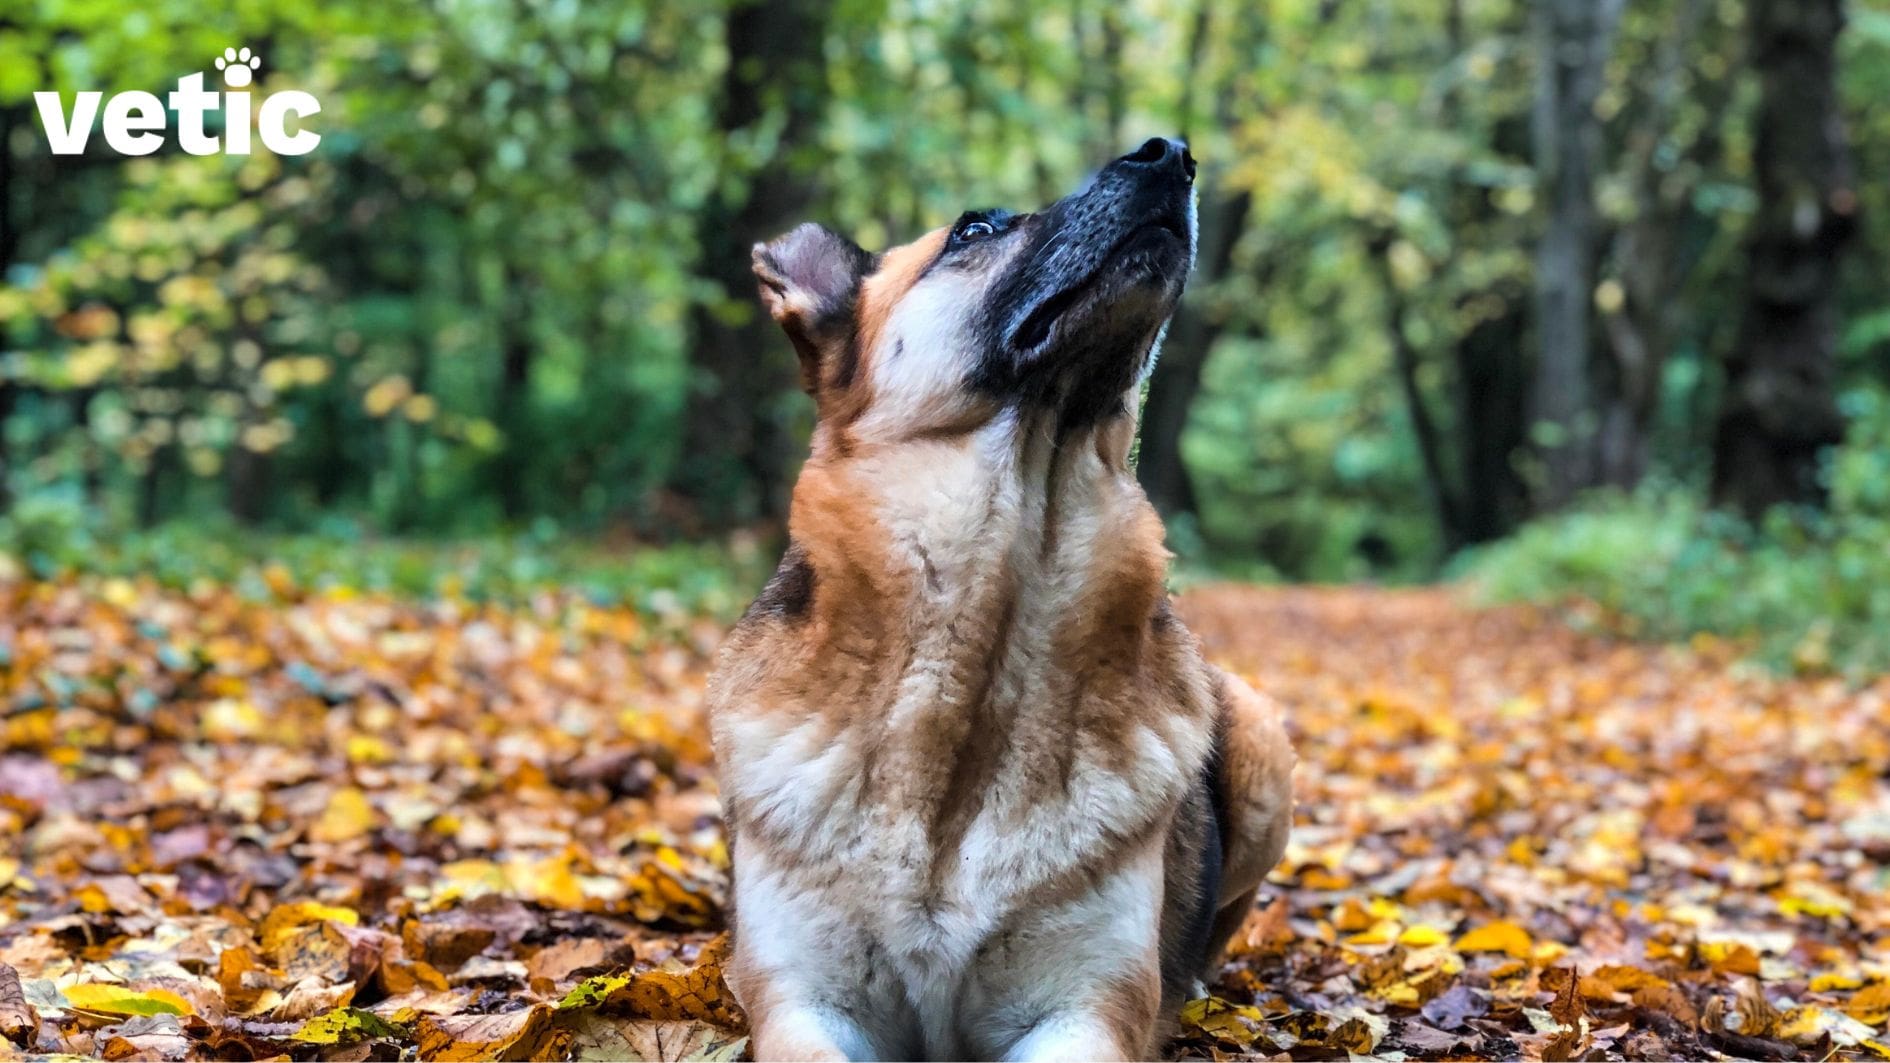 German Shepherd sitting on fallen leaves with lots of trees in the background. They are looking up, probably at one of the trees because they heard a noise.